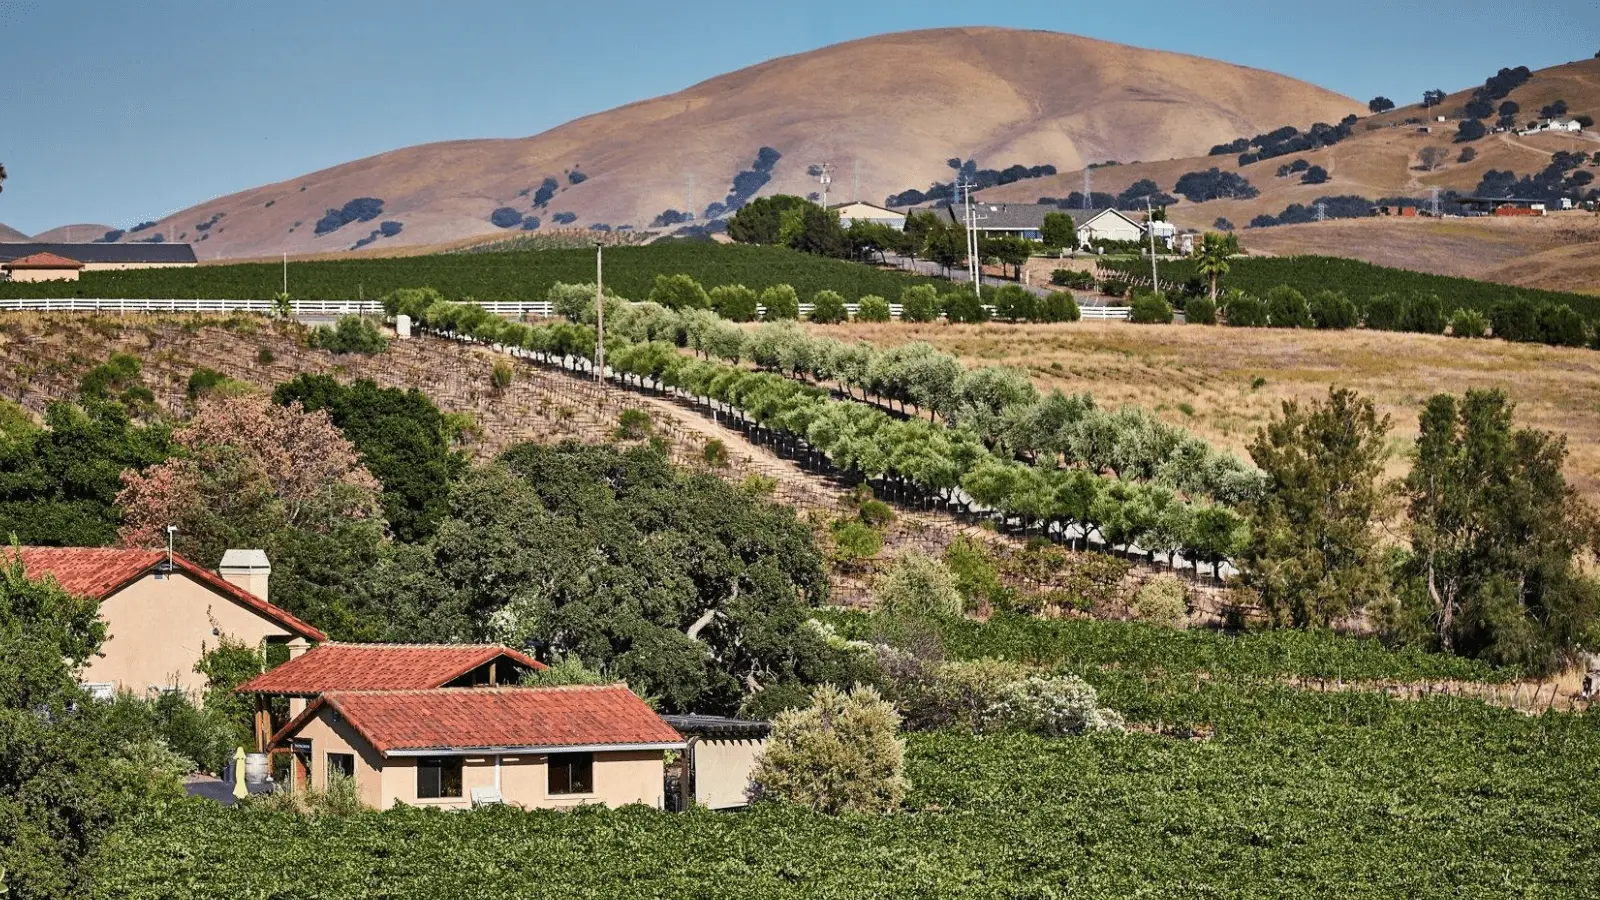 A scenic landscape shows a vineyard with green rows of grapevines, a clay-roofed farmhouse, and surrounding trees. In the background, rolling golden hills and additional homes are visible under a clear blue sky—an invitation to visit East Bay's Tri-Valley.